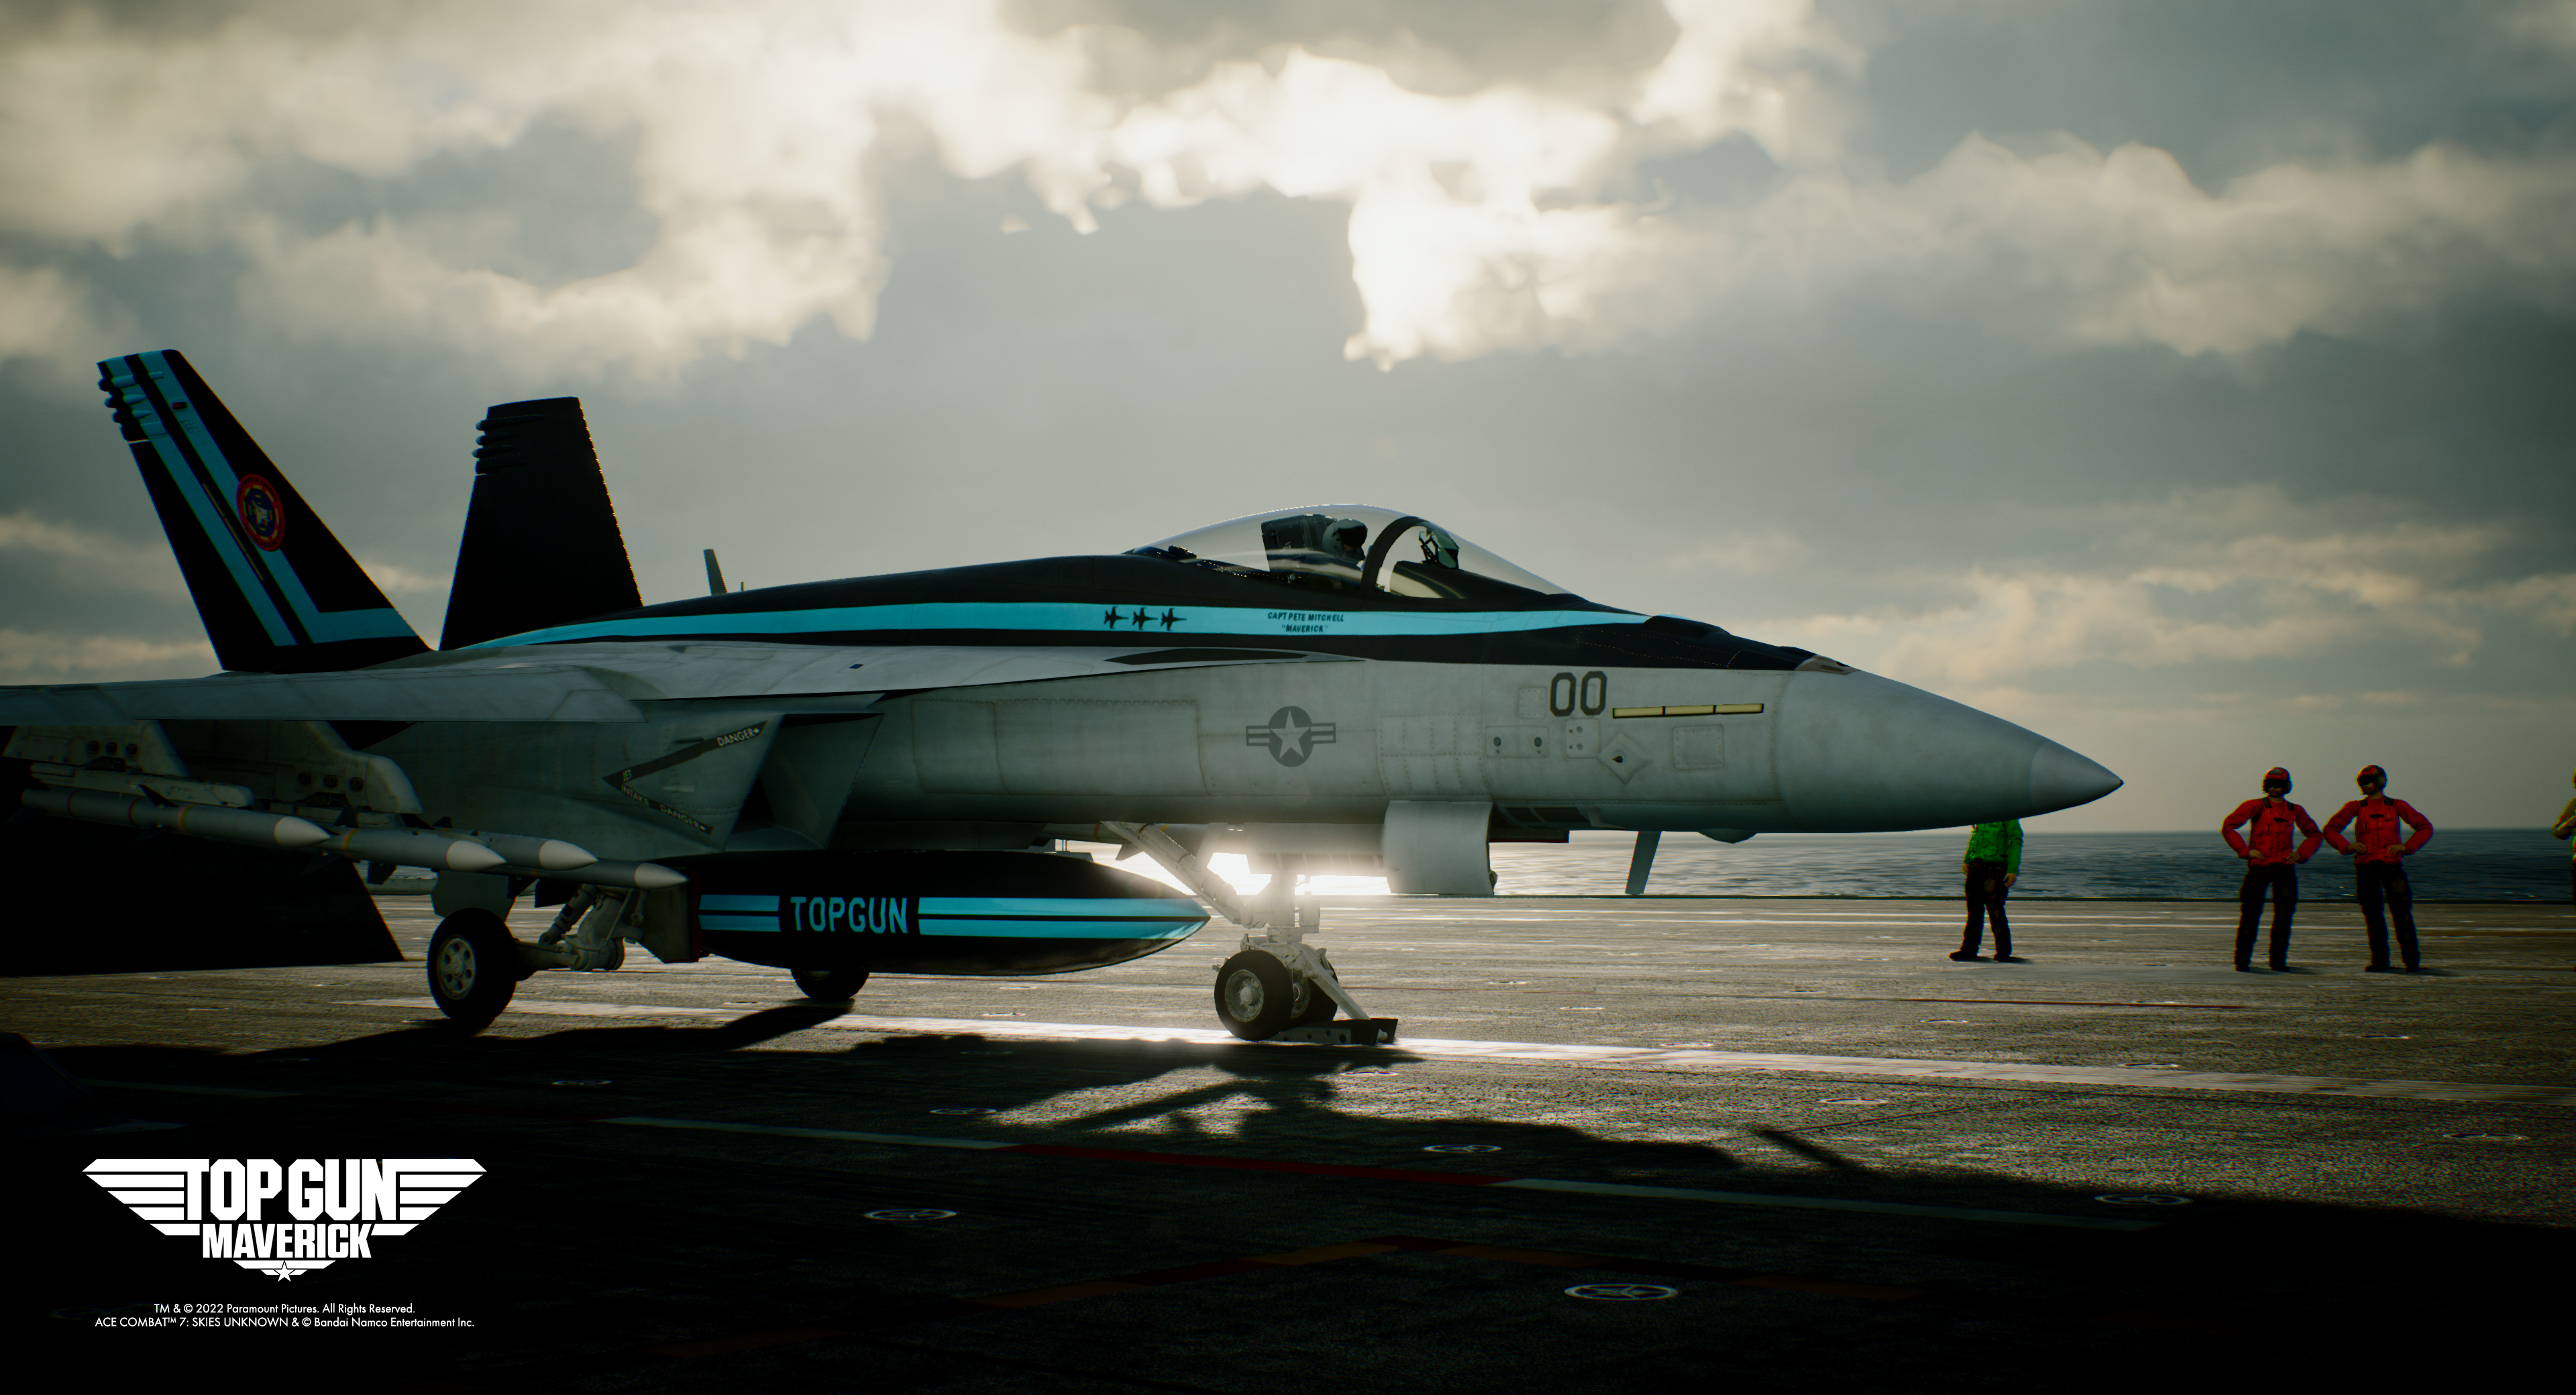 Bandai Namco US on X: <<ACE COMBAT 7 x Top Gun: Maverick collaboration  wallpaper! >> To celebrate the movie and the DLC launch, ACE COMBAT team  released the collaboration wallpaper for each